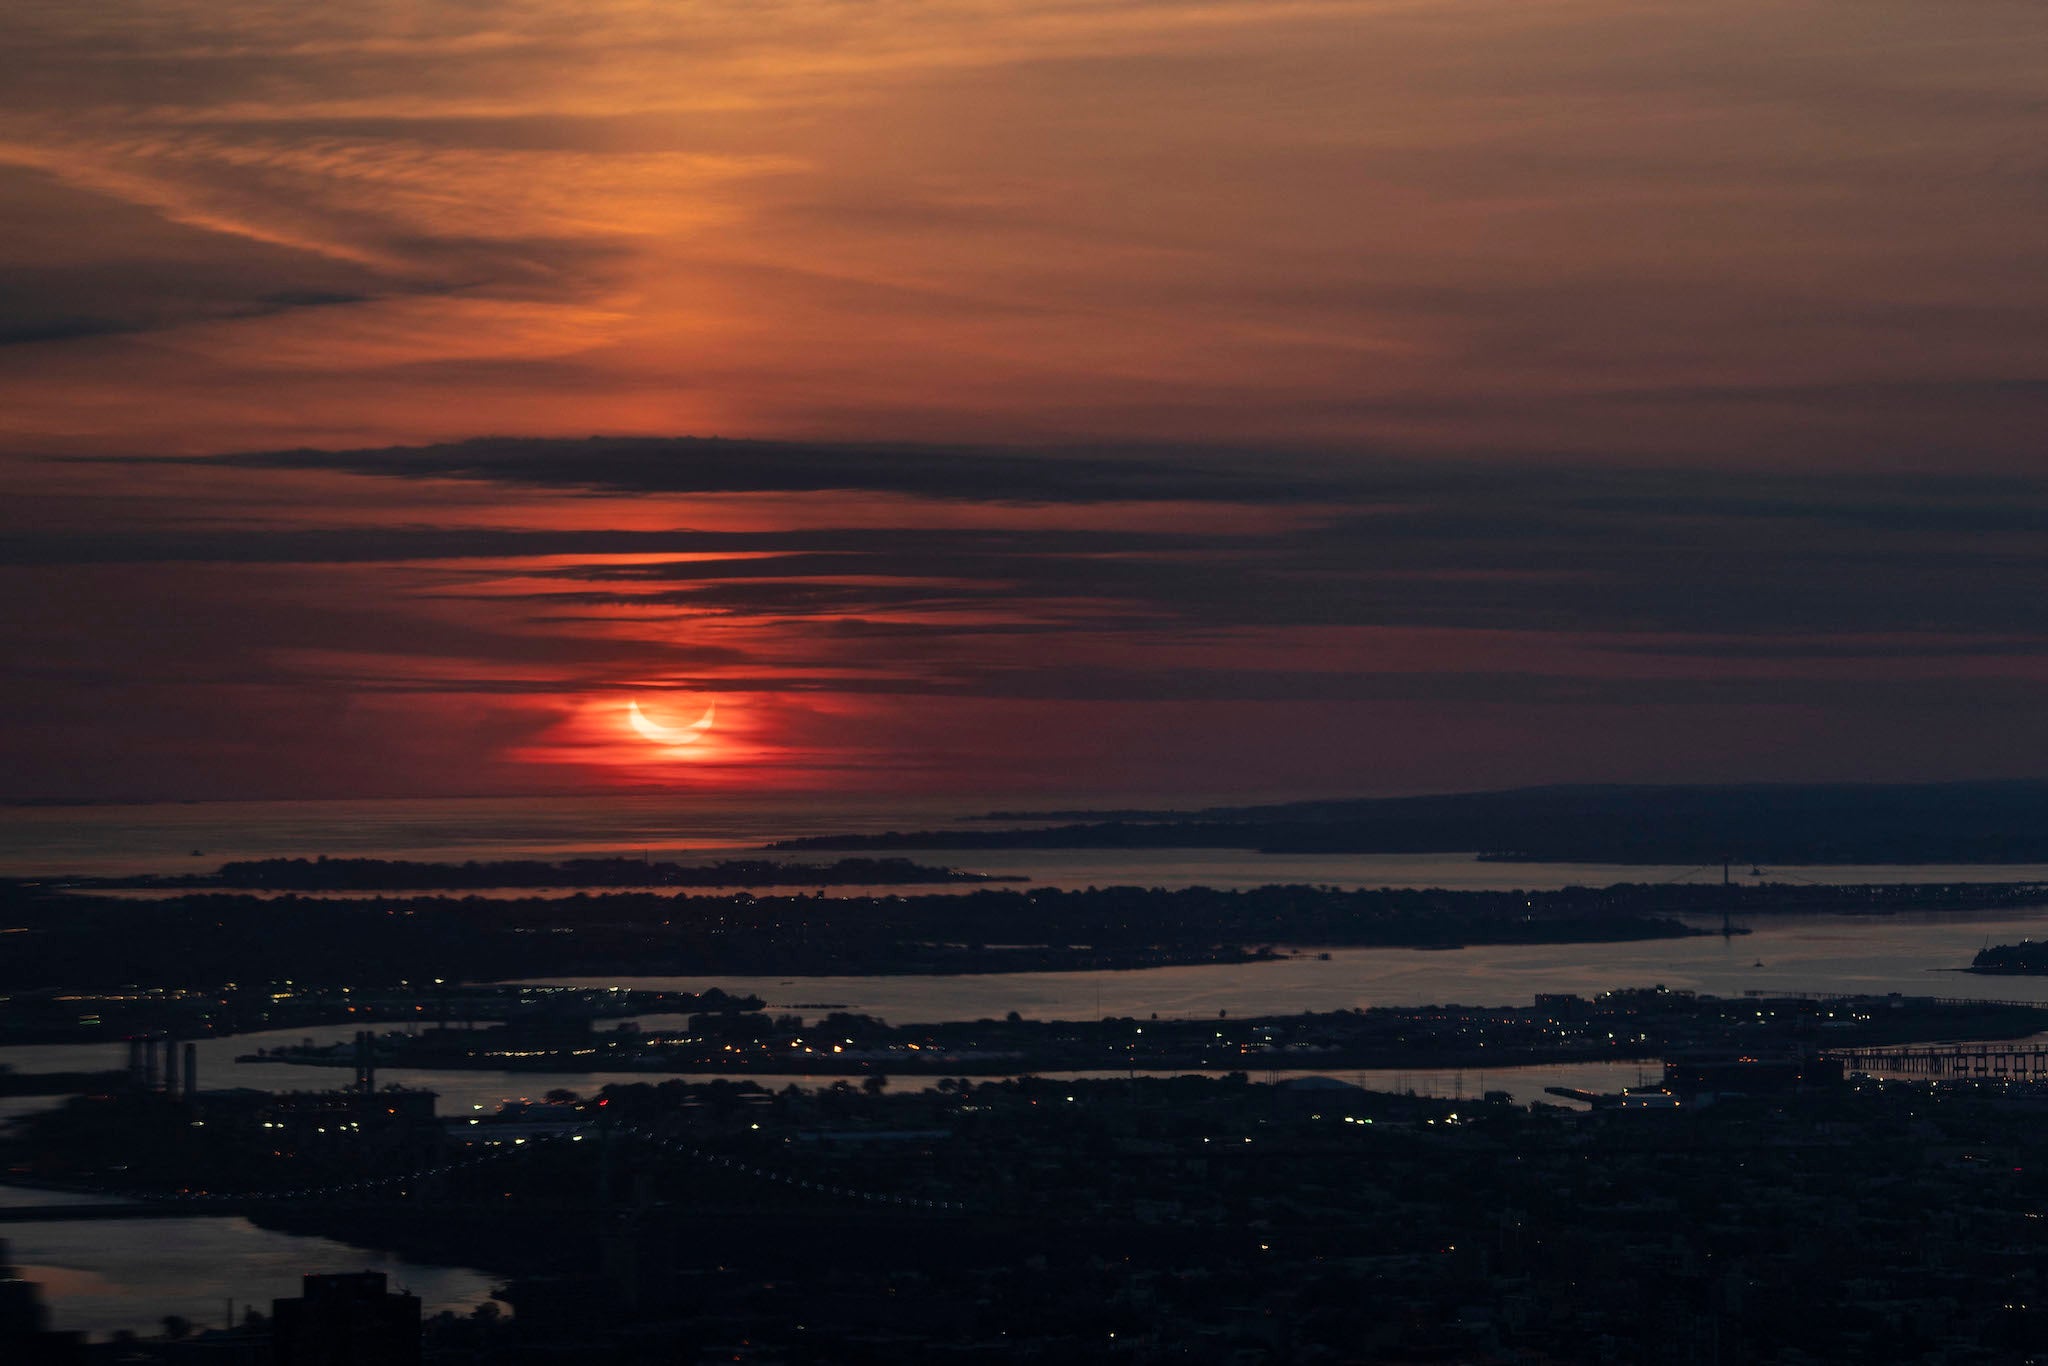 The sun rises partially eclipsed in a view taken from Summit One Vanderbilt